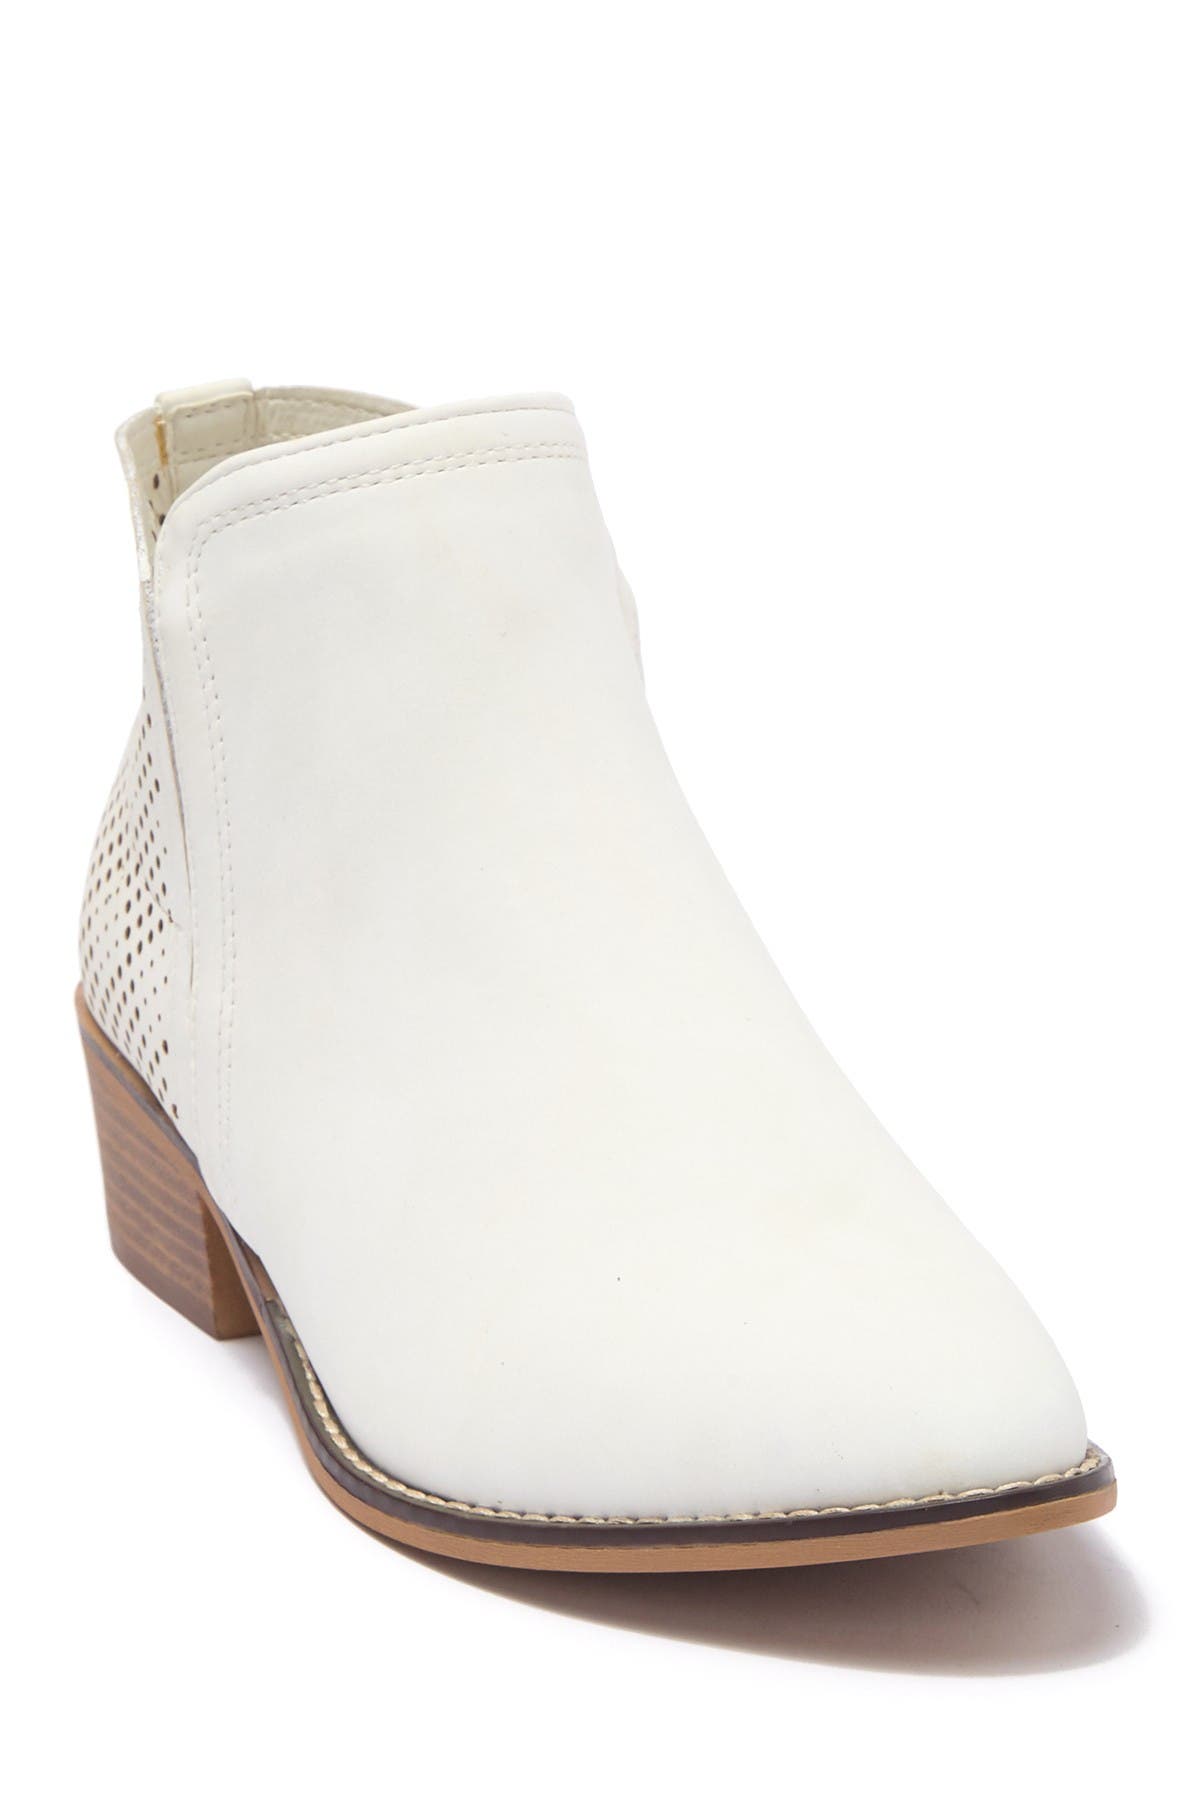 Madden Girl | Neville Perforated Bootie 